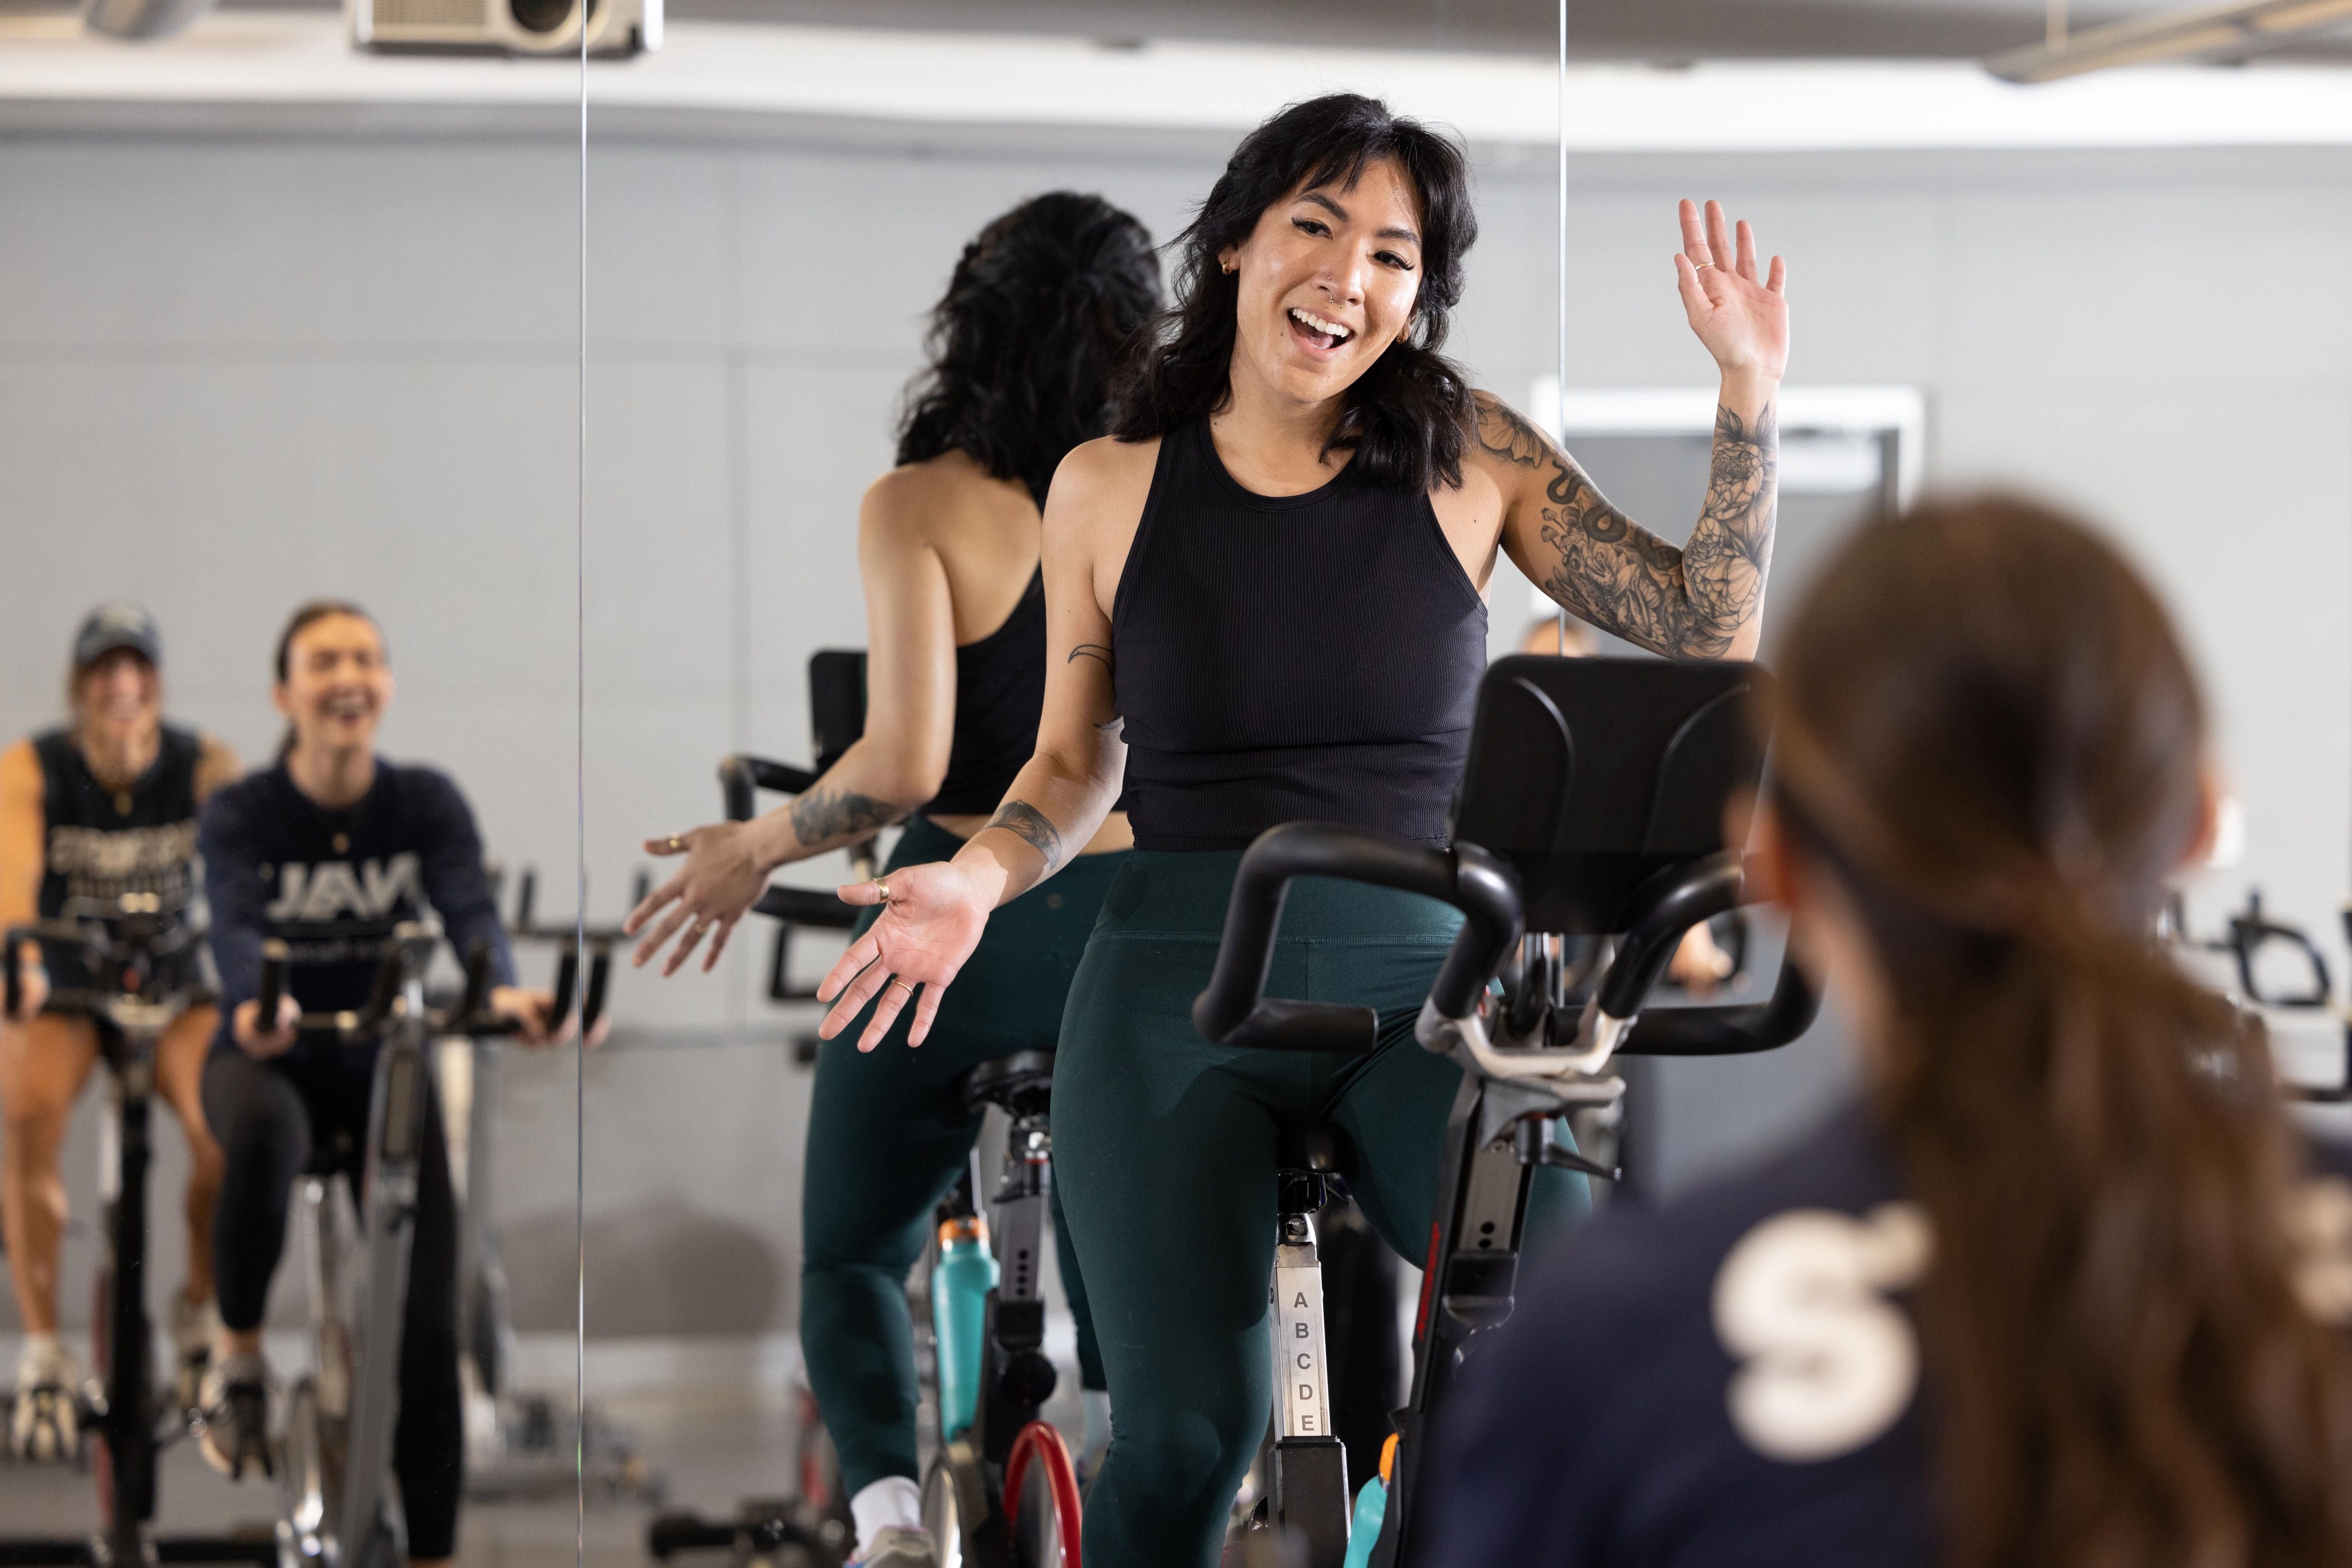 Spin class instructor holding a class.